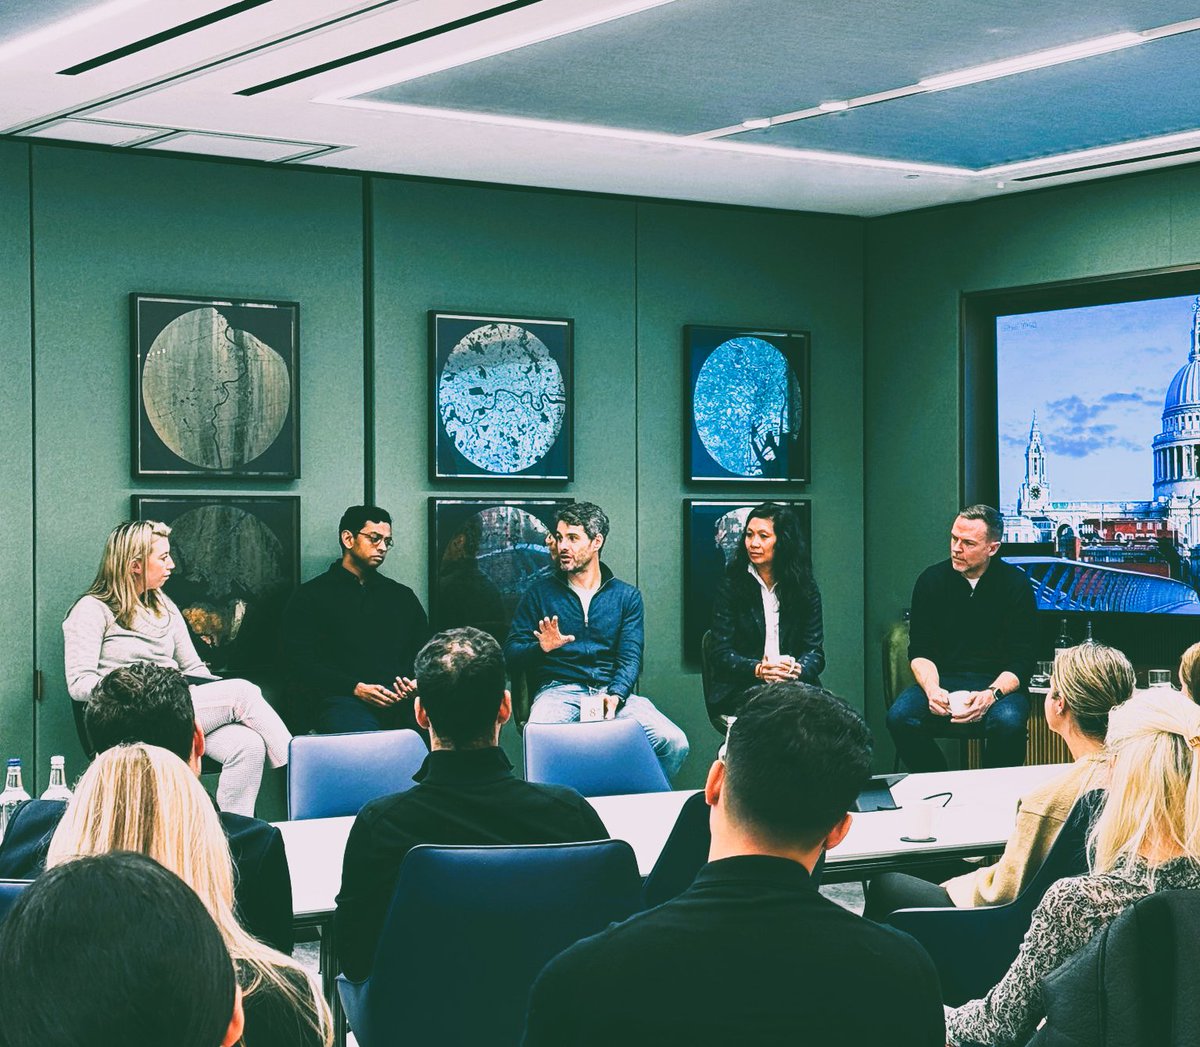 🔆The HTBC February's edition delved deeper into the process of scaling in #healthtech from leadership teams to M&A. Thank you to @8roadsventures for hosting us. @drmolsg 👉A new TechBio chapter is coming up in March, more here: tinyurl.com/2race9kx @l3ighbrody